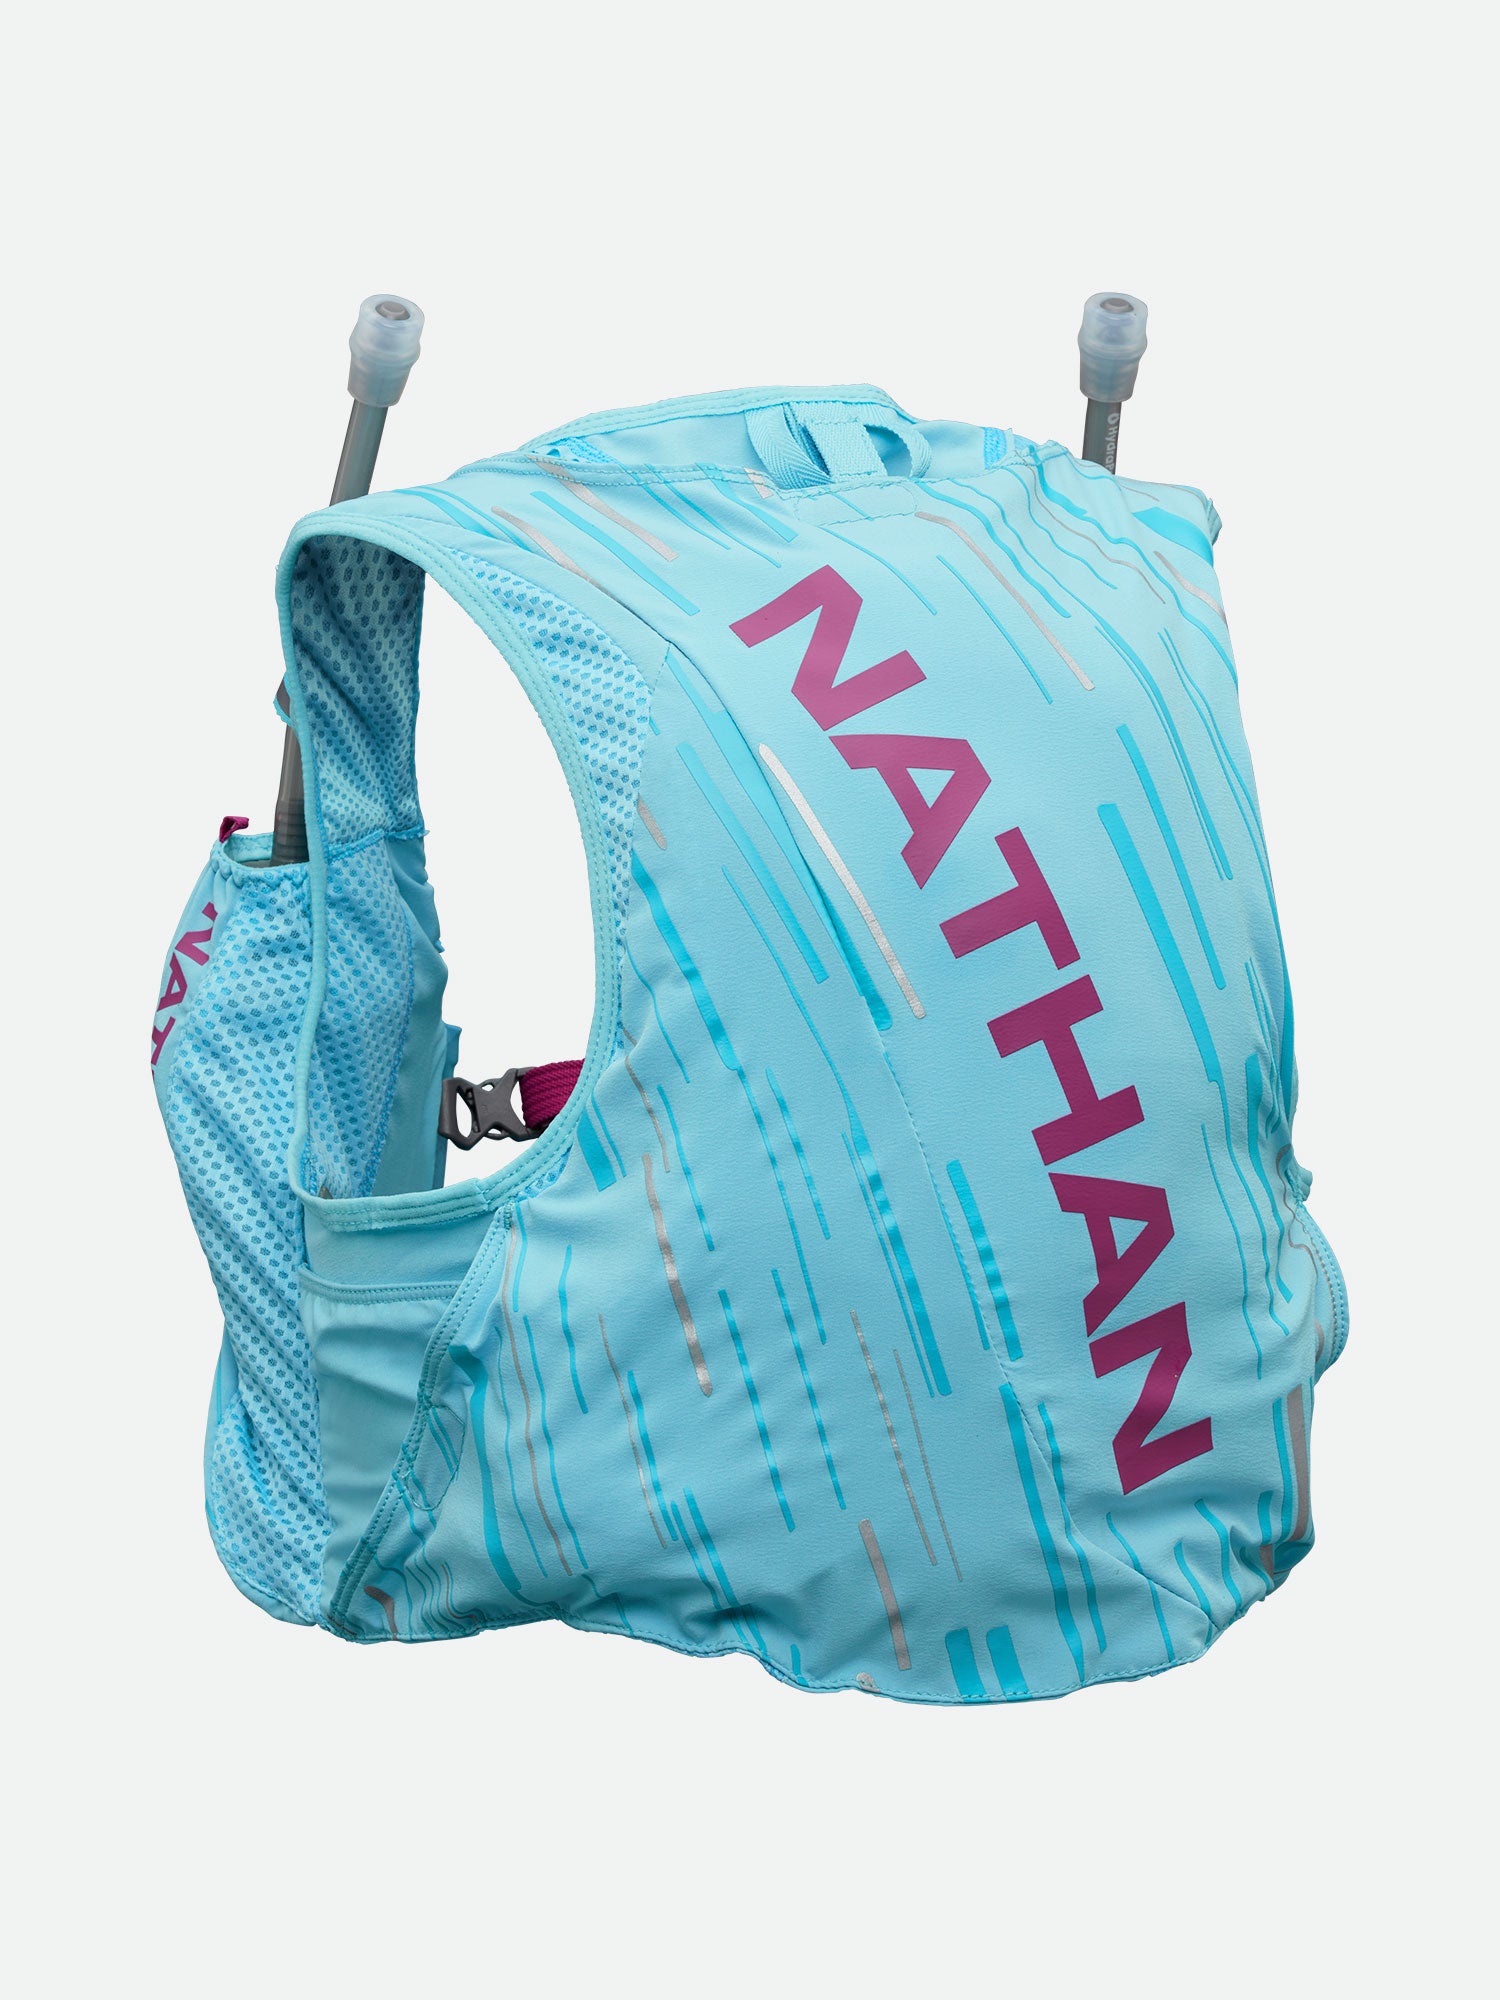  Nathan NS4851-0339-00 Speed Draw Plus Insulated